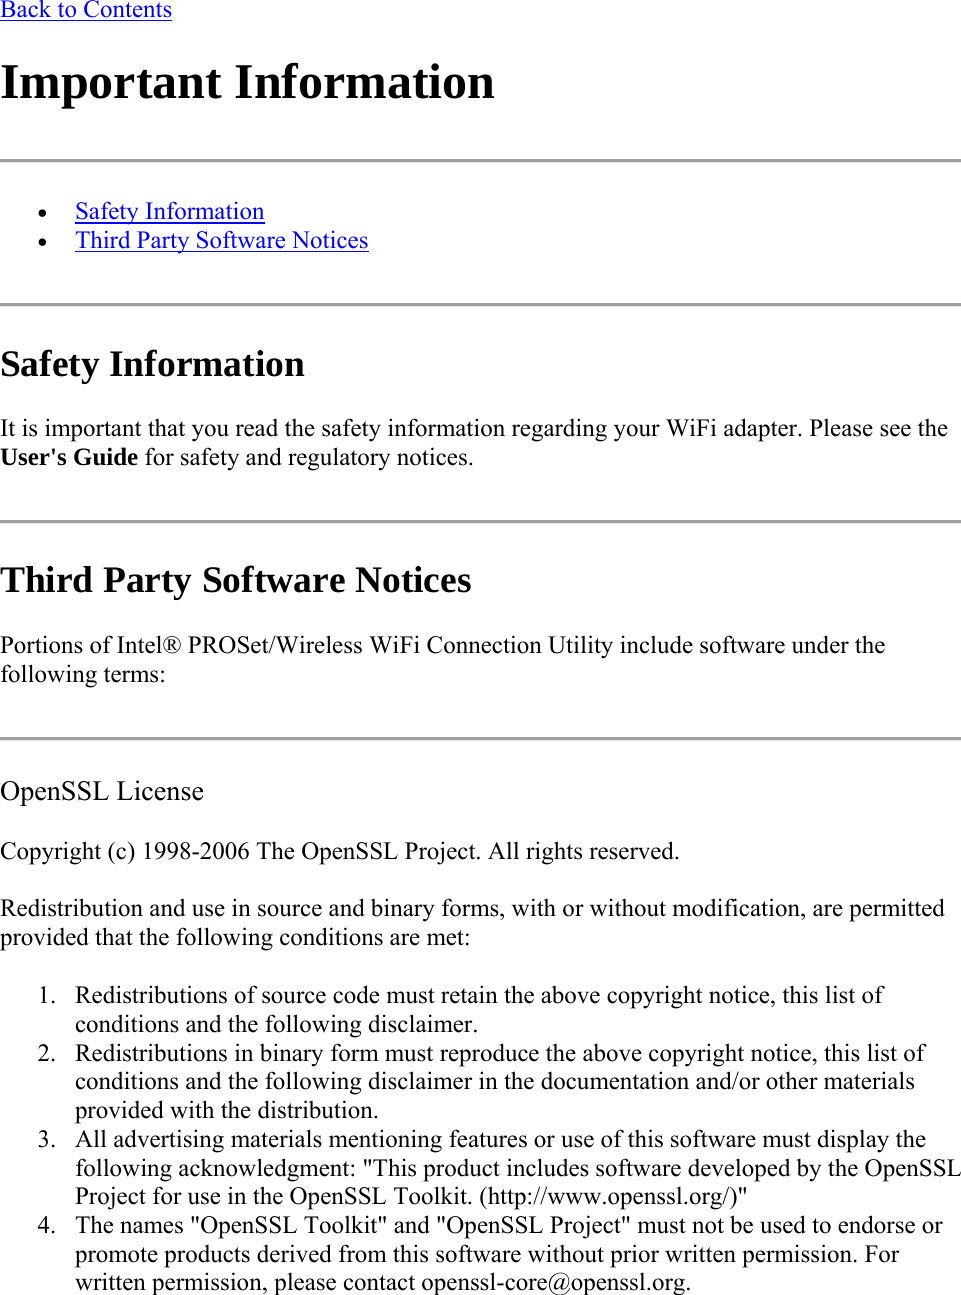 Back to Contents Important Information   Safety Information  Third Party Software Notices  Safety Information  It is important that you read the safety information regarding your WiFi adapter. Please see the User&apos;s Guide for safety and regulatory notices.  Third Party Software Notices Portions of Intel® PROSet/Wireless WiFi Connection Utility include software under the following terms:  OpenSSL License Copyright (c) 1998-2006 The OpenSSL Project. All rights reserved.  Redistribution and use in source and binary forms, with or without modification, are permitted provided that the following conditions are met:  1. Redistributions of source code must retain the above copyright notice, this list of conditions and the following disclaimer. 2. Redistributions in binary form must reproduce the above copyright notice, this list of conditions and the following disclaimer in the documentation and/or other materials provided with the distribution. 3. All advertising materials mentioning features or use of this software must display the following acknowledgment: &quot;This product includes software developed by the OpenSSL Project for use in the OpenSSL Toolkit. (http://www.openssl.org/)&quot; 4. The names &quot;OpenSSL Toolkit&quot; and &quot;OpenSSL Project&quot; must not be used to endorse or promote products derived from this software without prior written permission. For written permission, please contact openssl-core@openssl.org. 